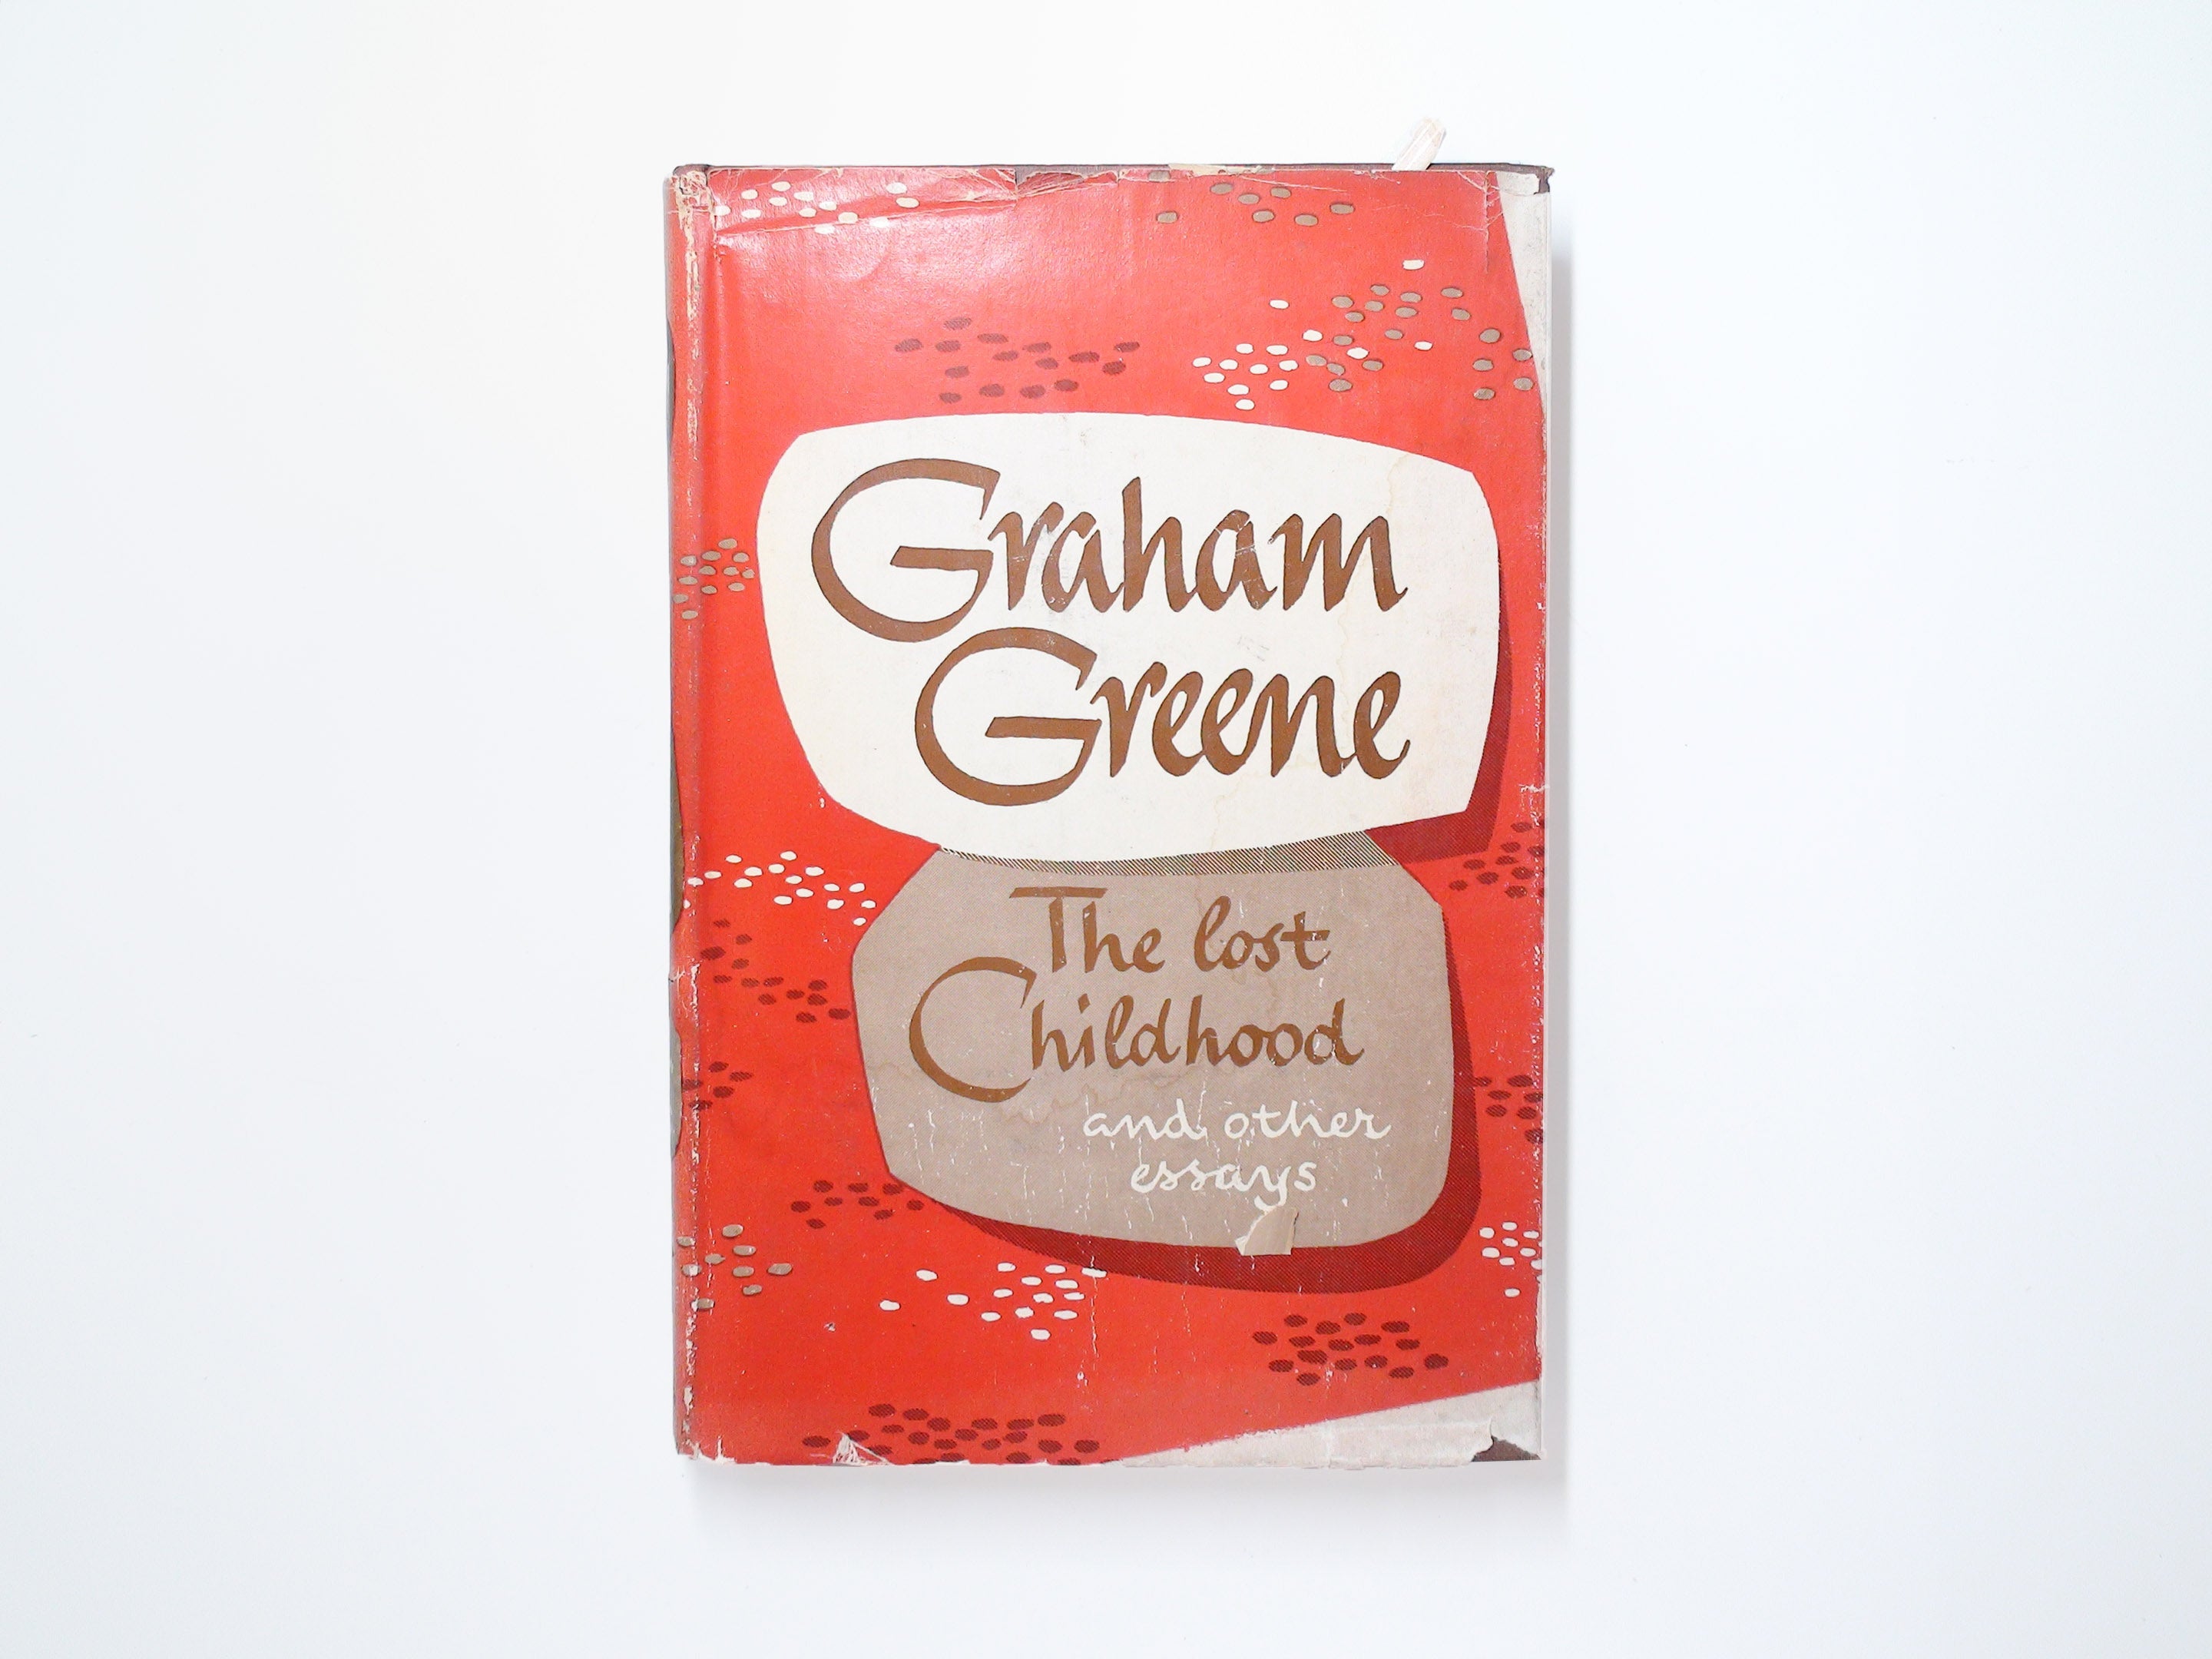 The Lost Childhood and Other Essays, Graham Greene, with Dust Jacket, 1952